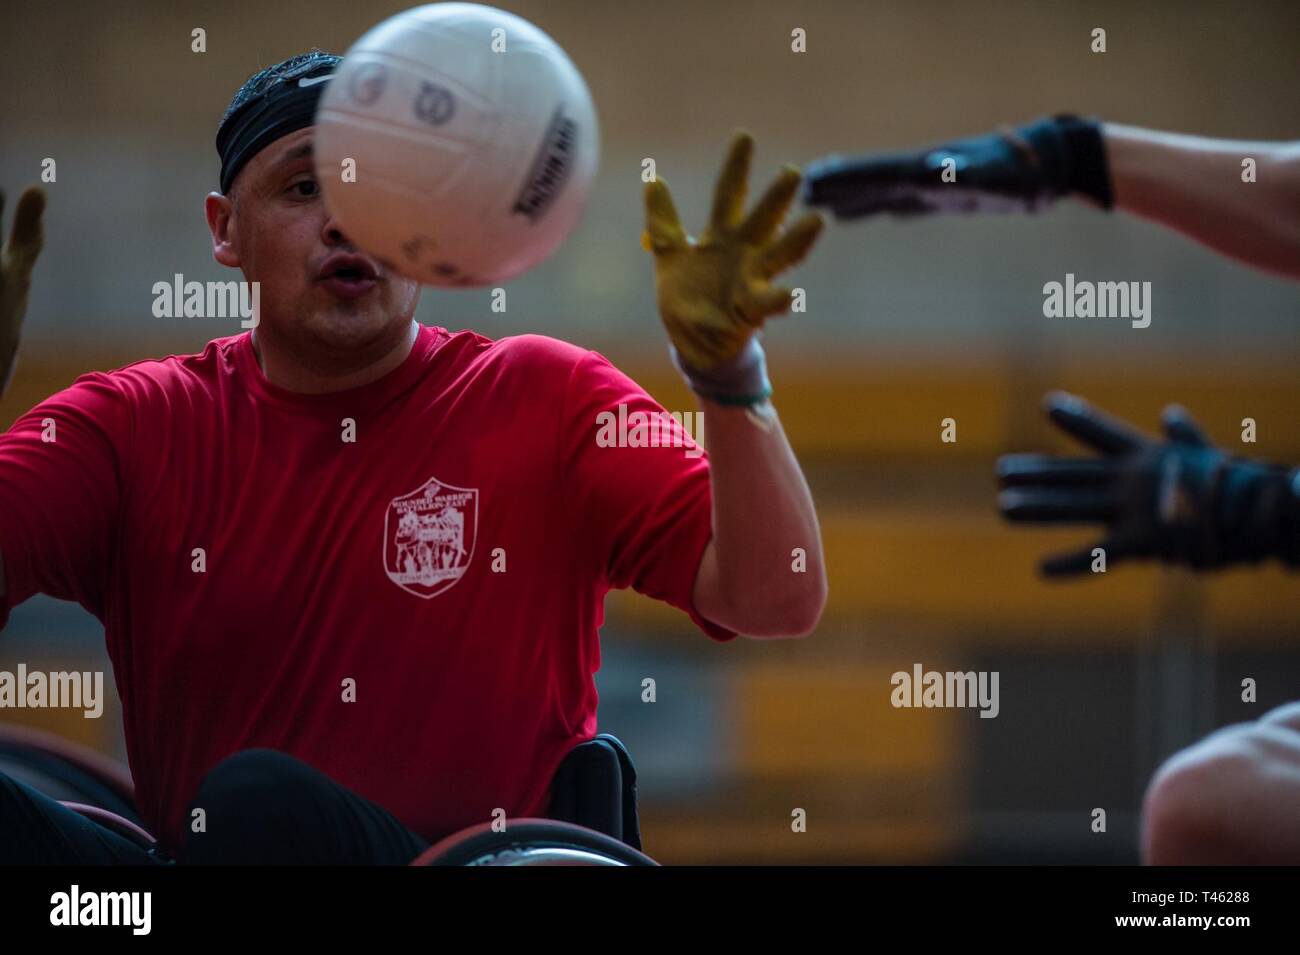 A U.S. Marine Corps athlete practices during a 2019 Marine Corps Trials wheelchair rugby practice at Marine Corps Base Camp Pendleton, California, Feb. 28. The Marine Corps Trials promotes recovery and rehabilitation through adaptive sports participation and develops camaraderie among recovering service members and veterans. Additionally, the competition is an opportunity for participants to demonstrate physical and mental achievements and serves as the primary venue to select Marine Corps participants for the DoD Warrior Games. Stock Photo